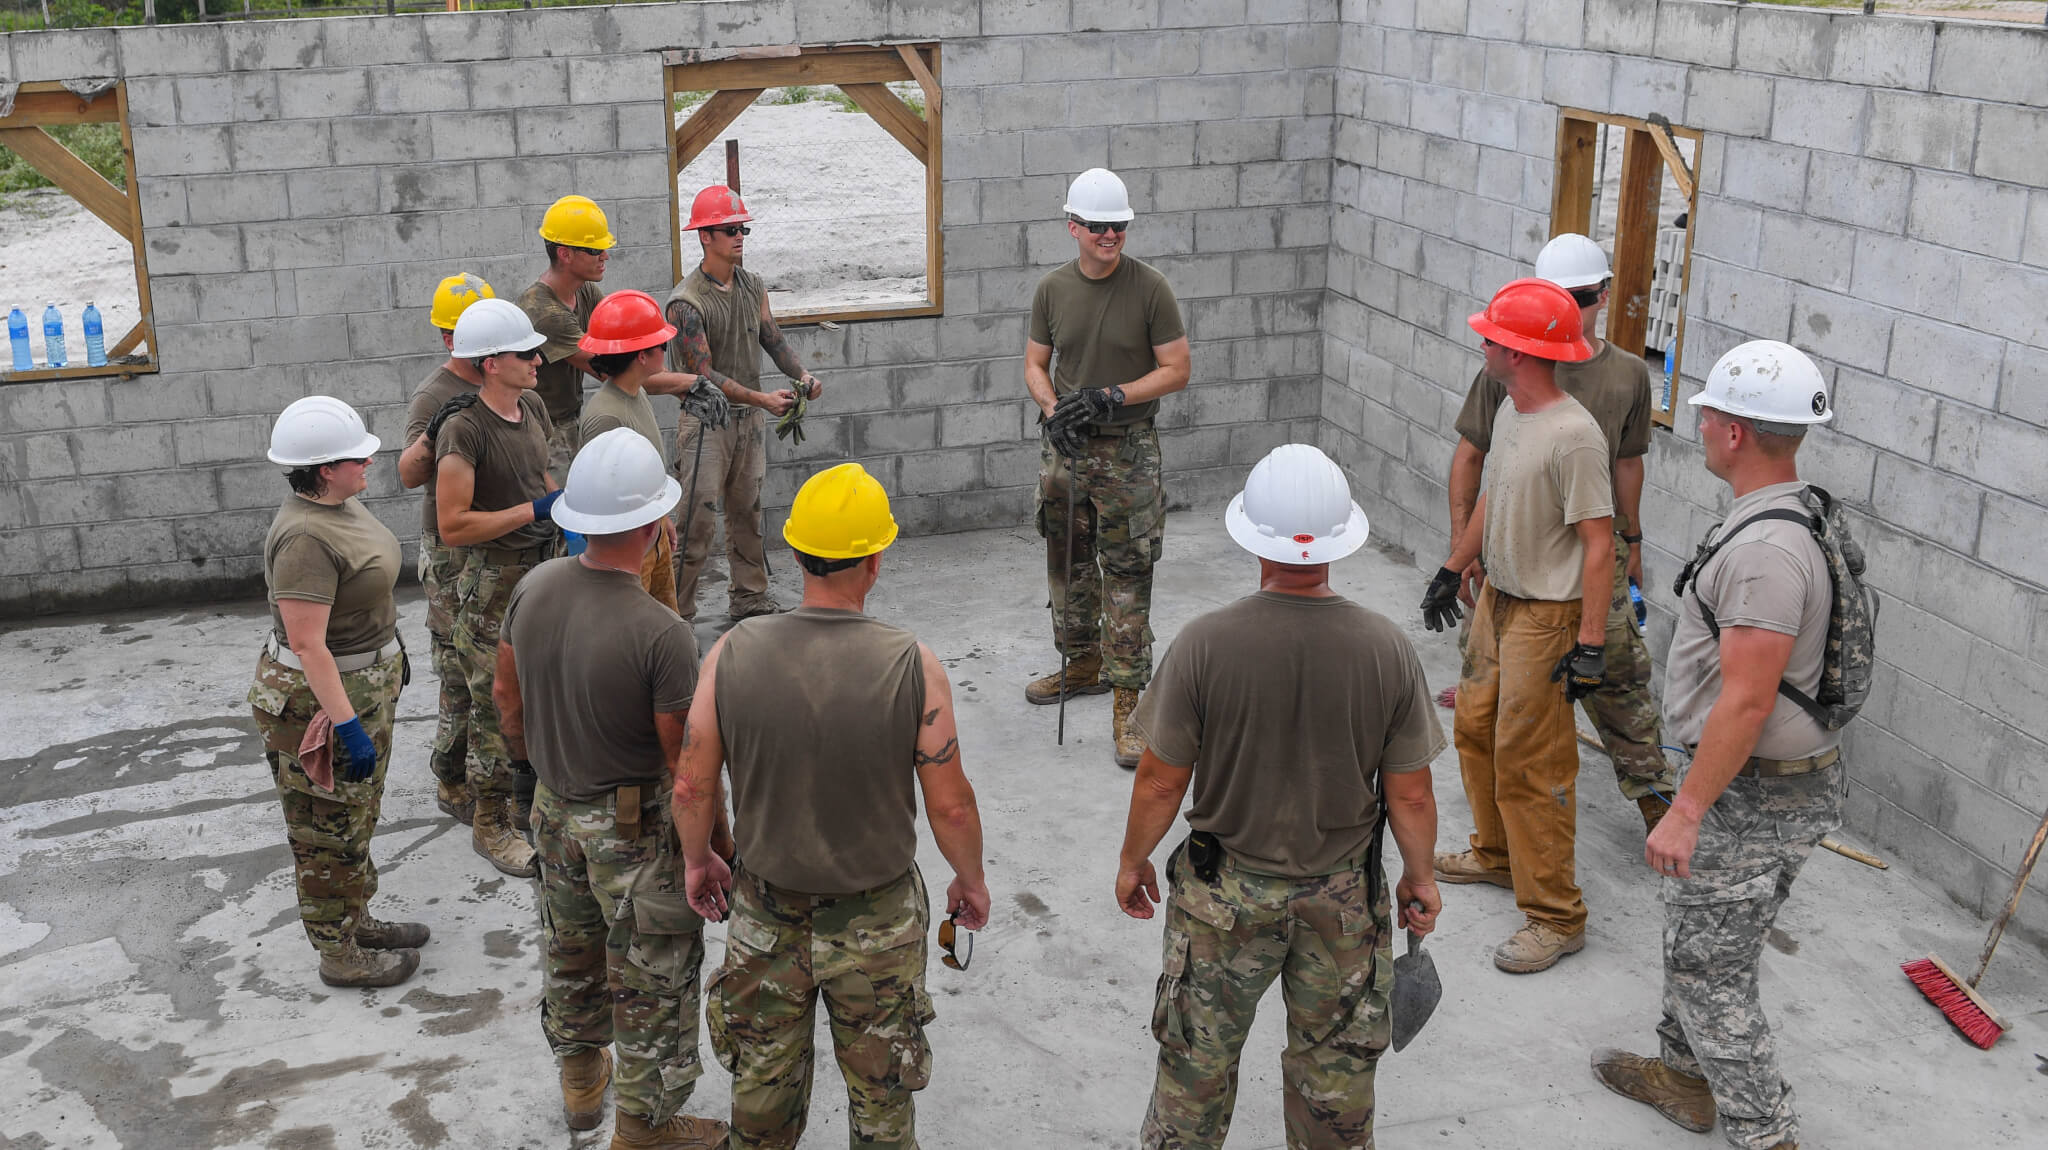 Army 2nd Lt. Gabriel Kern, platoon leader assigned to the 276th Engineer Company, Missouri Army National Guard, does a closing brief after a concrete pour at a construction site in Linden, Guyana. Photo by Senior Airman Derek Seifert.